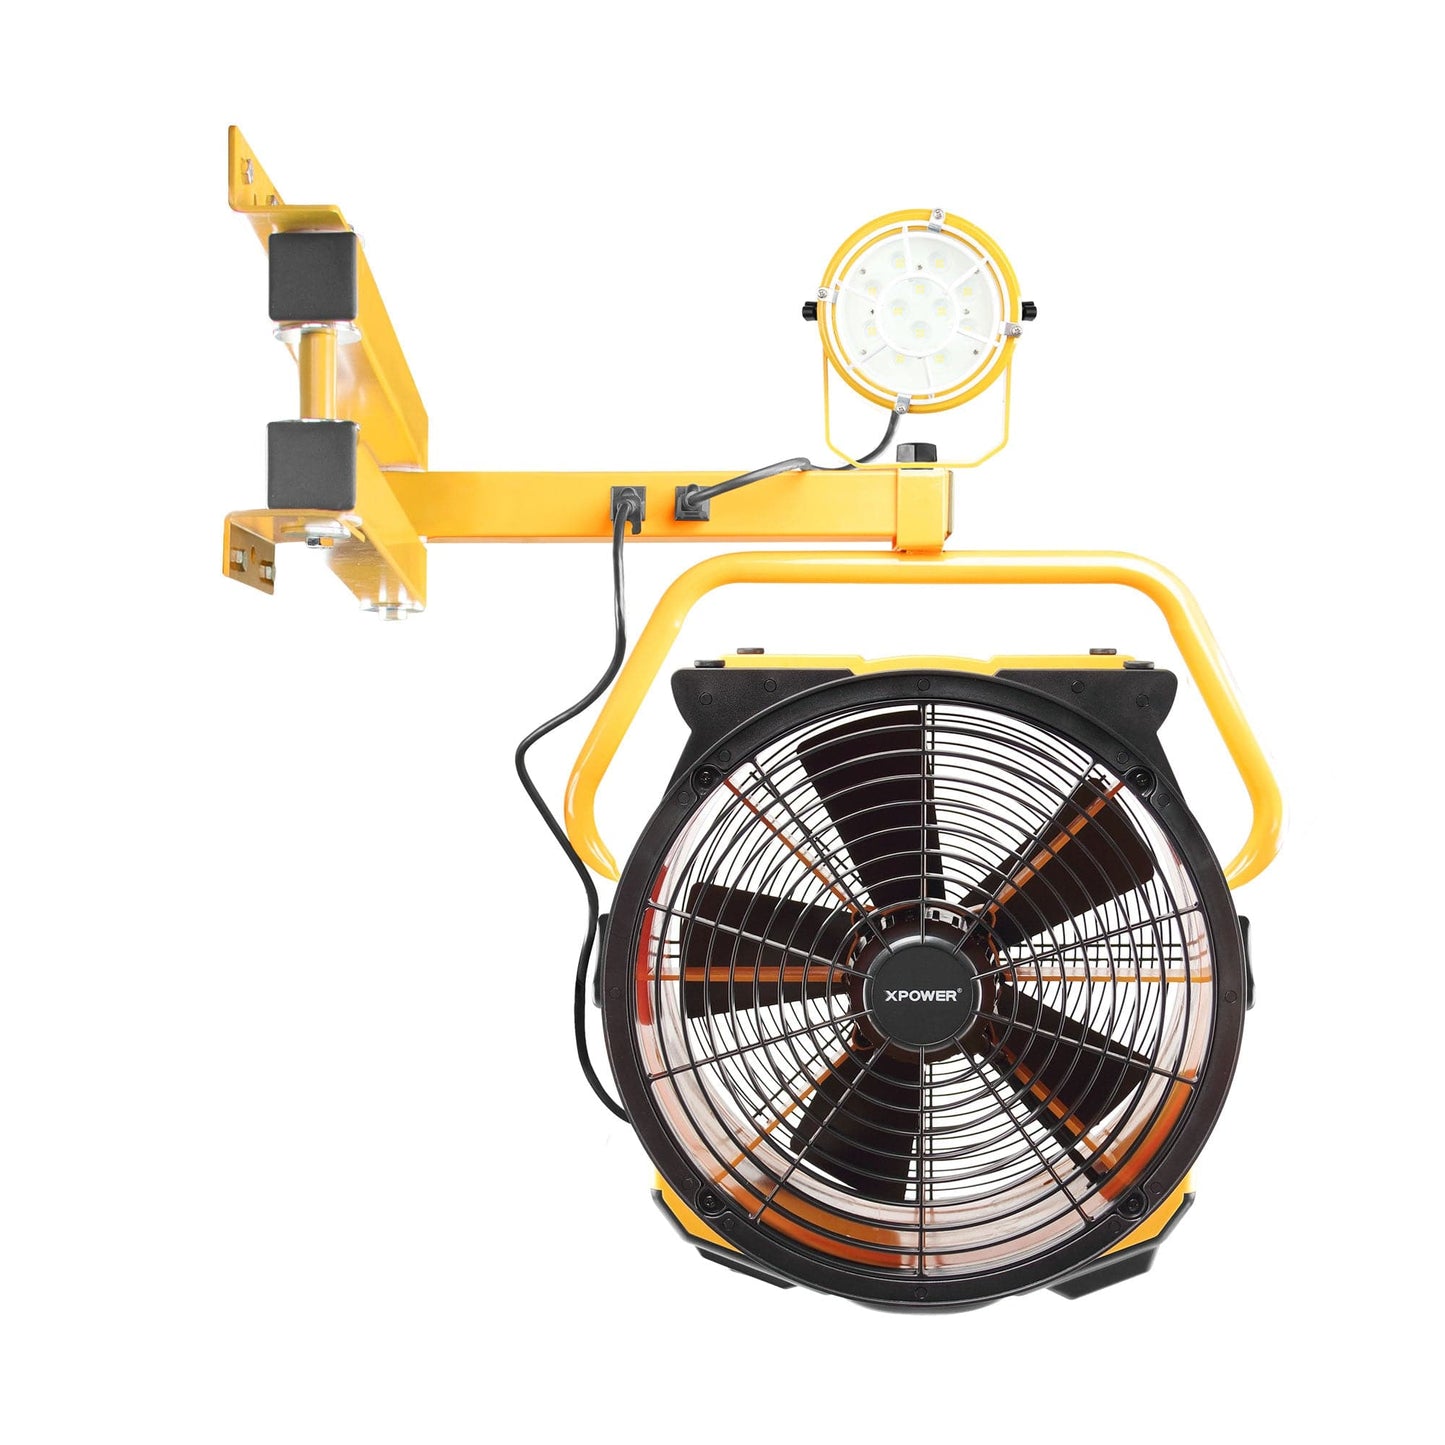 XPOWER FA-420K2 1/3 HP 3600 CFM 5 Speed 18" Warehouse, Dock, Trailer Cooling Fan with Built-in 3-Hour Timer, DA-510 40" Wall Mount Arm, and L-30 LED Spotlight